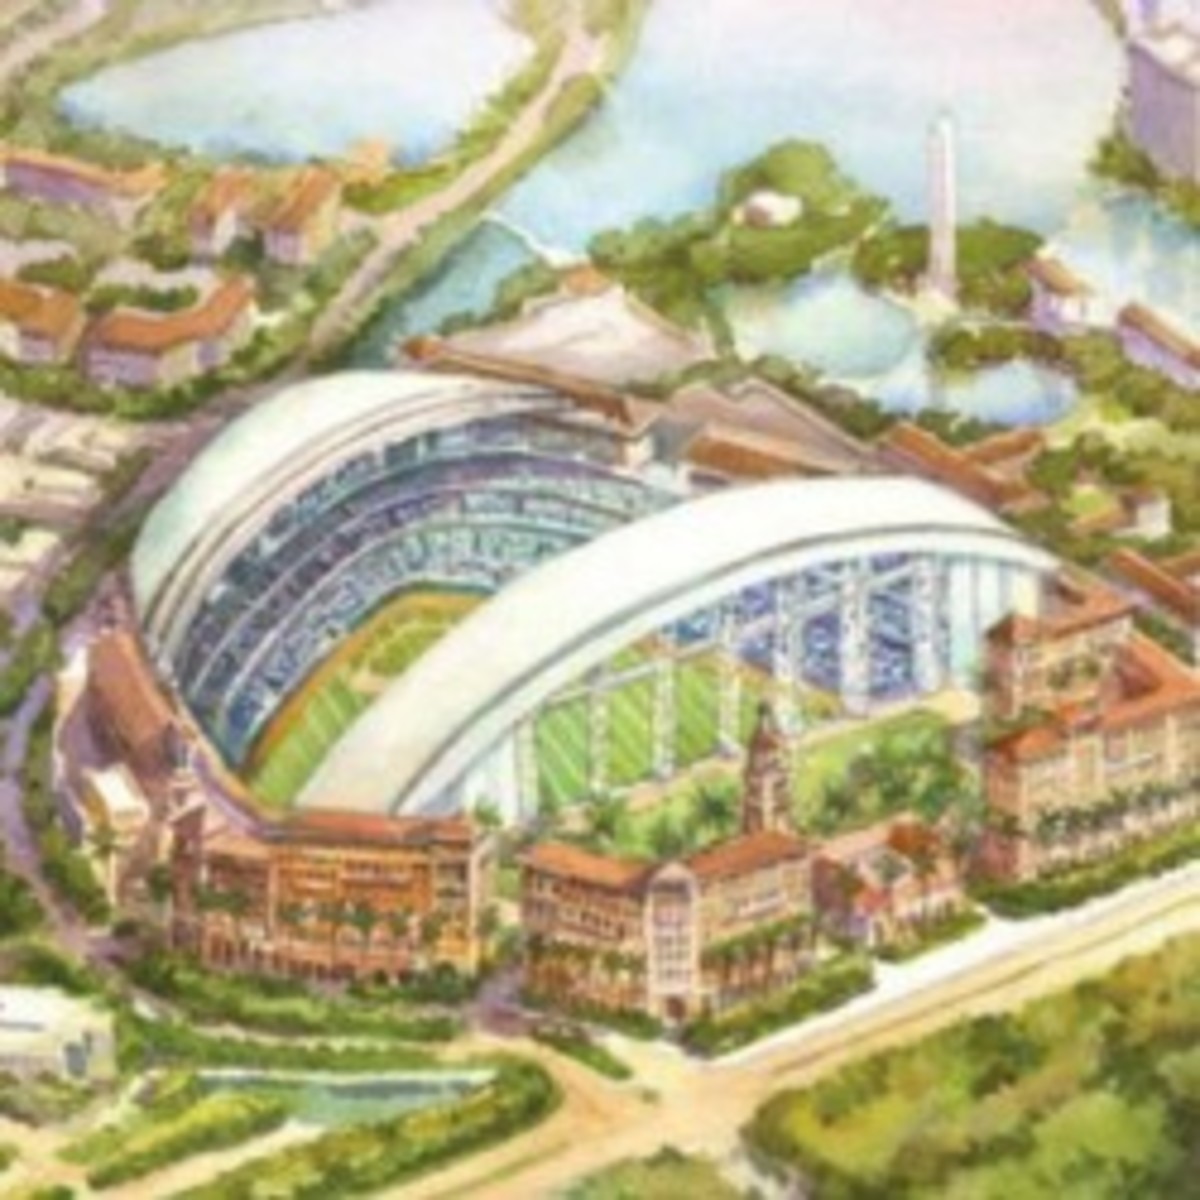 Developer unveils plan for new Tampa Bay Rays stadium - Sports Illustrated